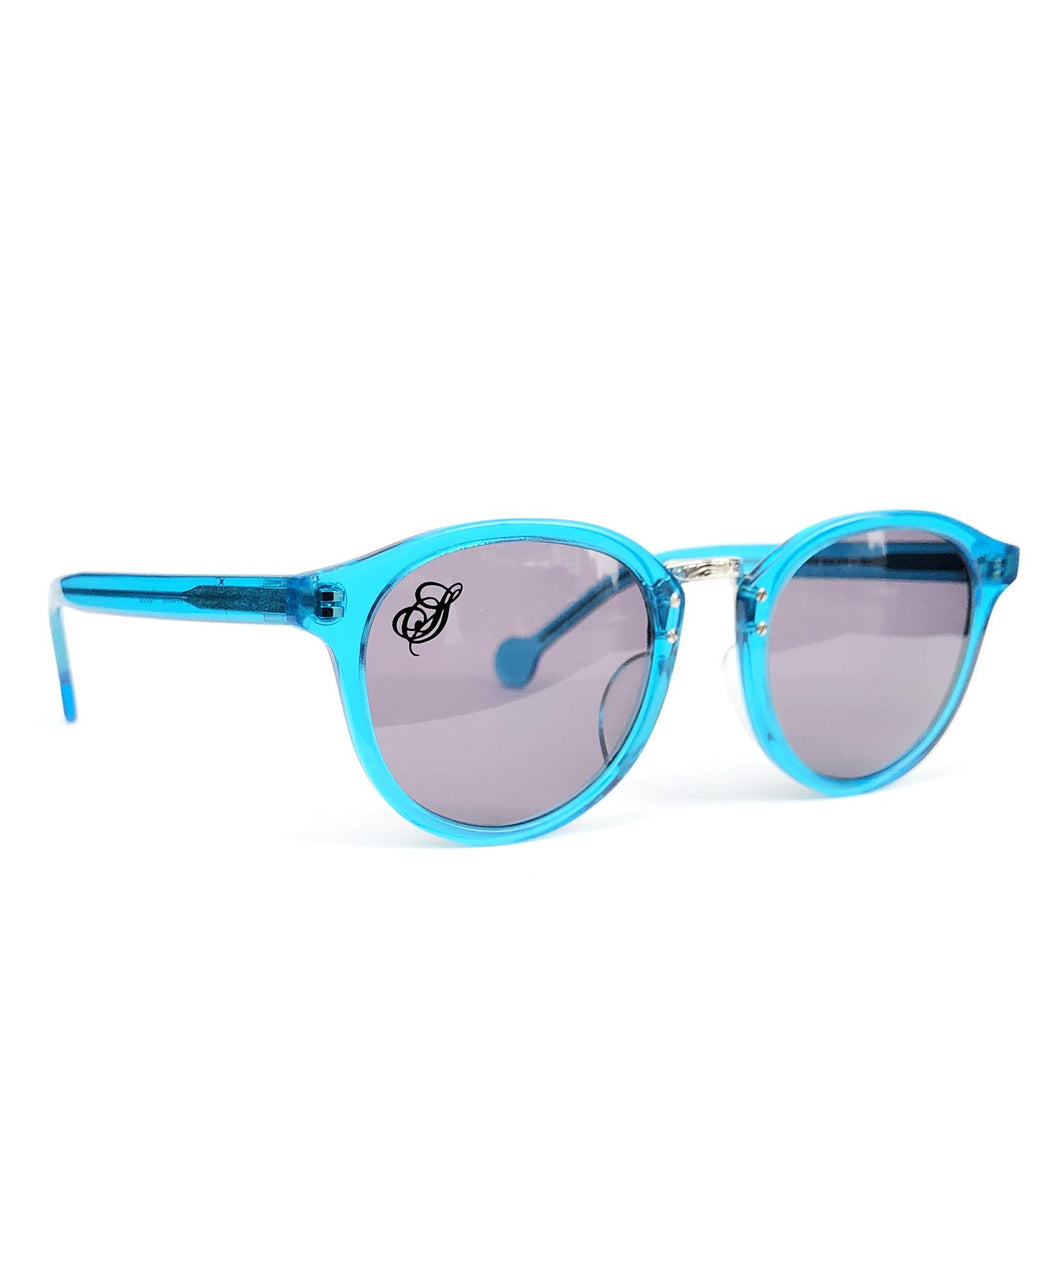 Session by STRUM Special Order Sunglasses - Clear Blue